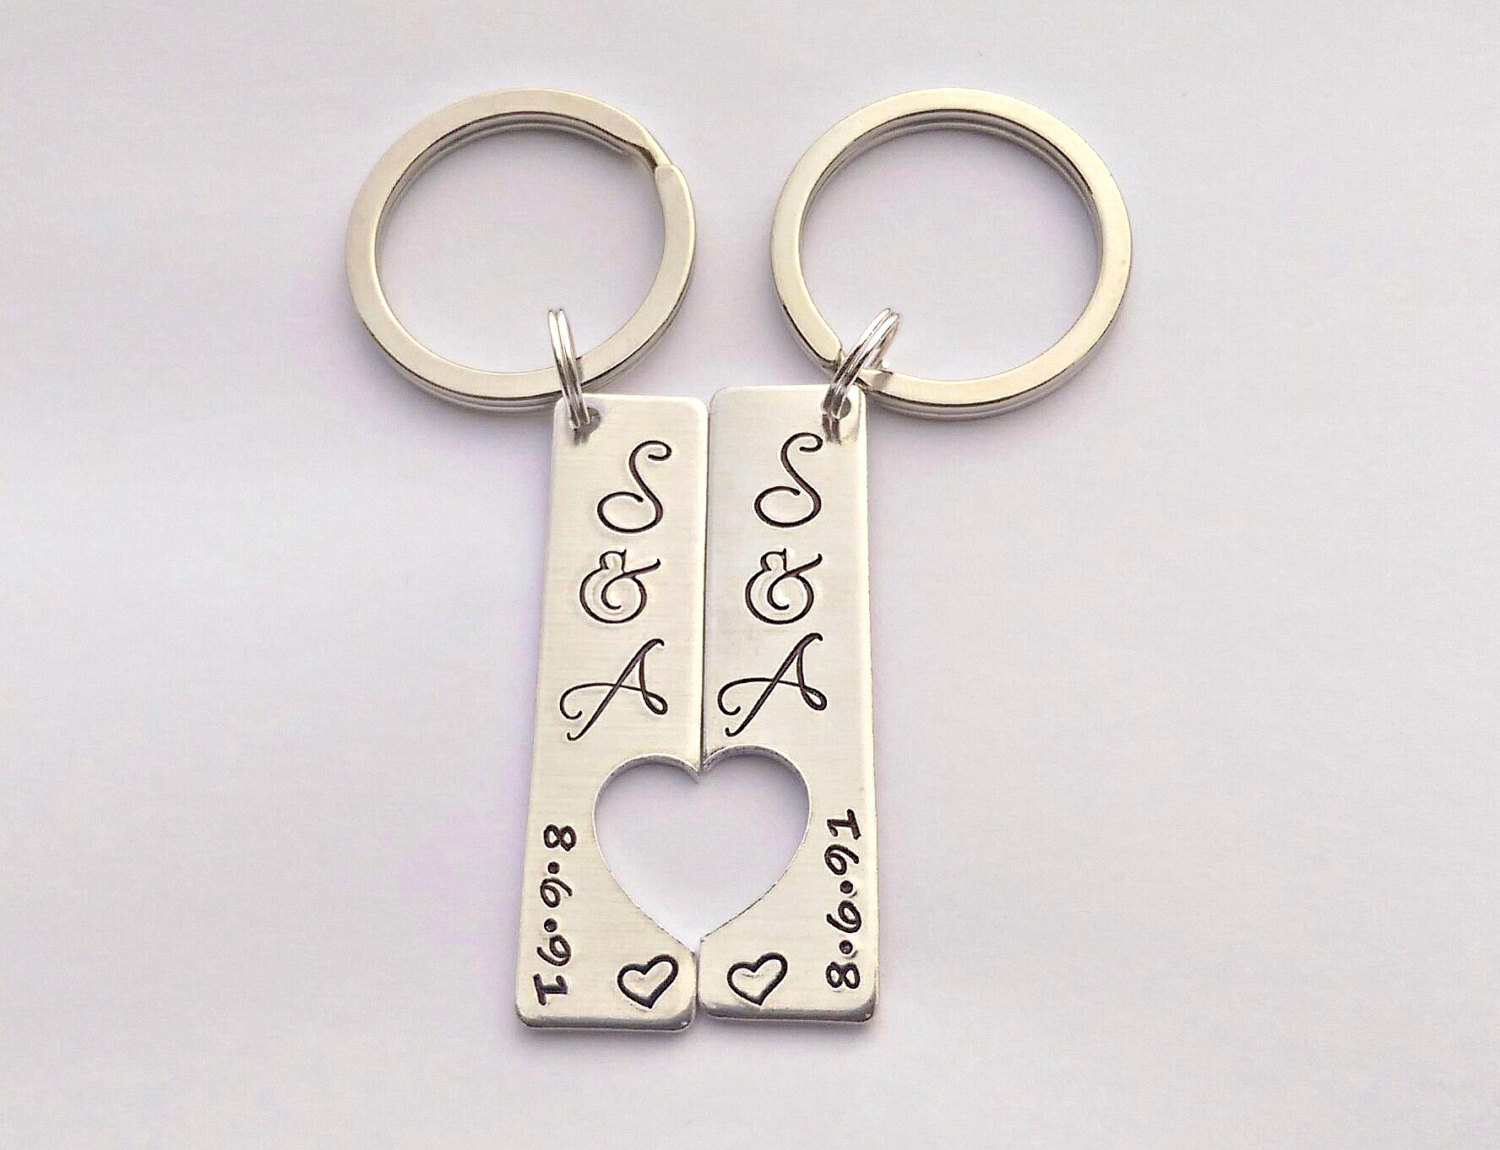 Personalized valentines gift - Personalized couples keyrings - his and ...